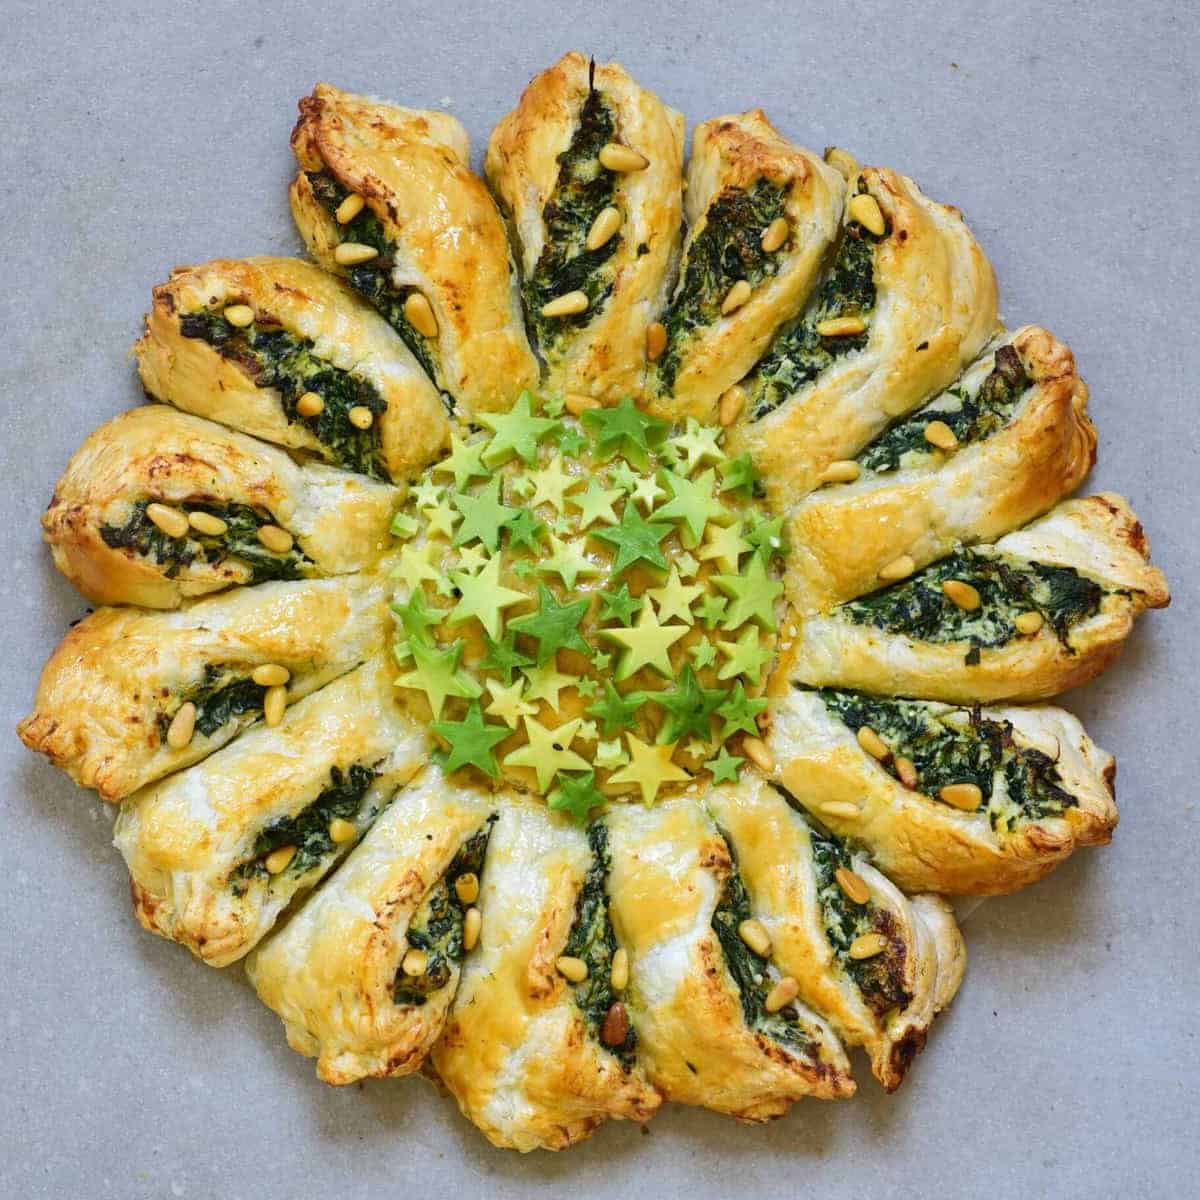 https://www.alphafoodie.com/wp-content/uploads/2021/12/Spinach-puff-pastry-square.jpeg